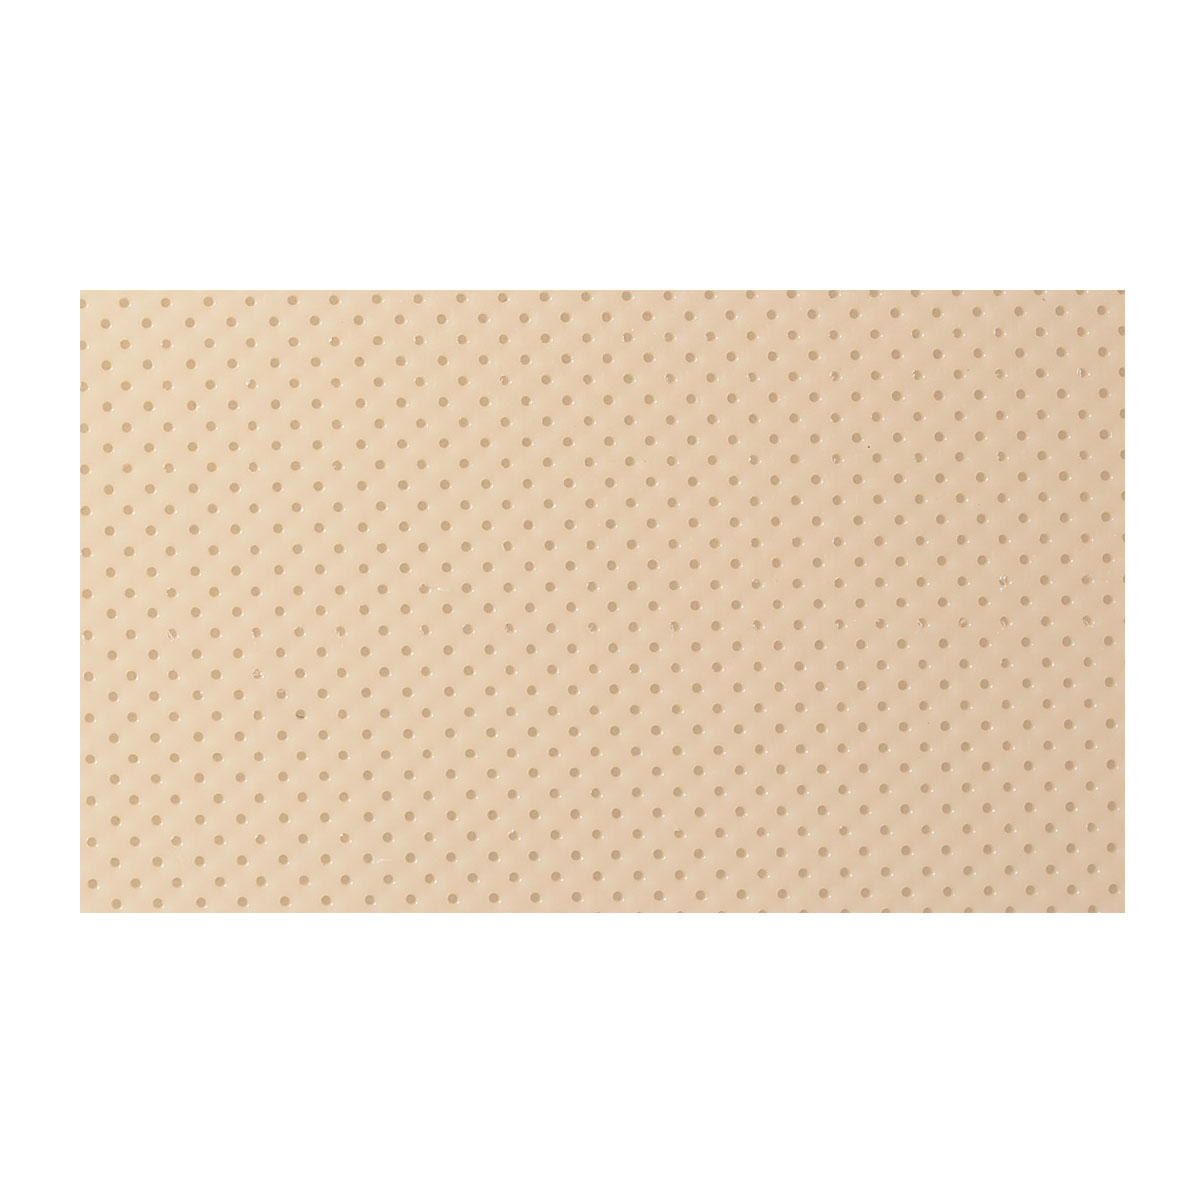 Picture of Orfit 24-5621-4 18 x 24 x 0.06 in. Classic Soft 13 Percent Micro Perforated Splinting Material - Case of 4